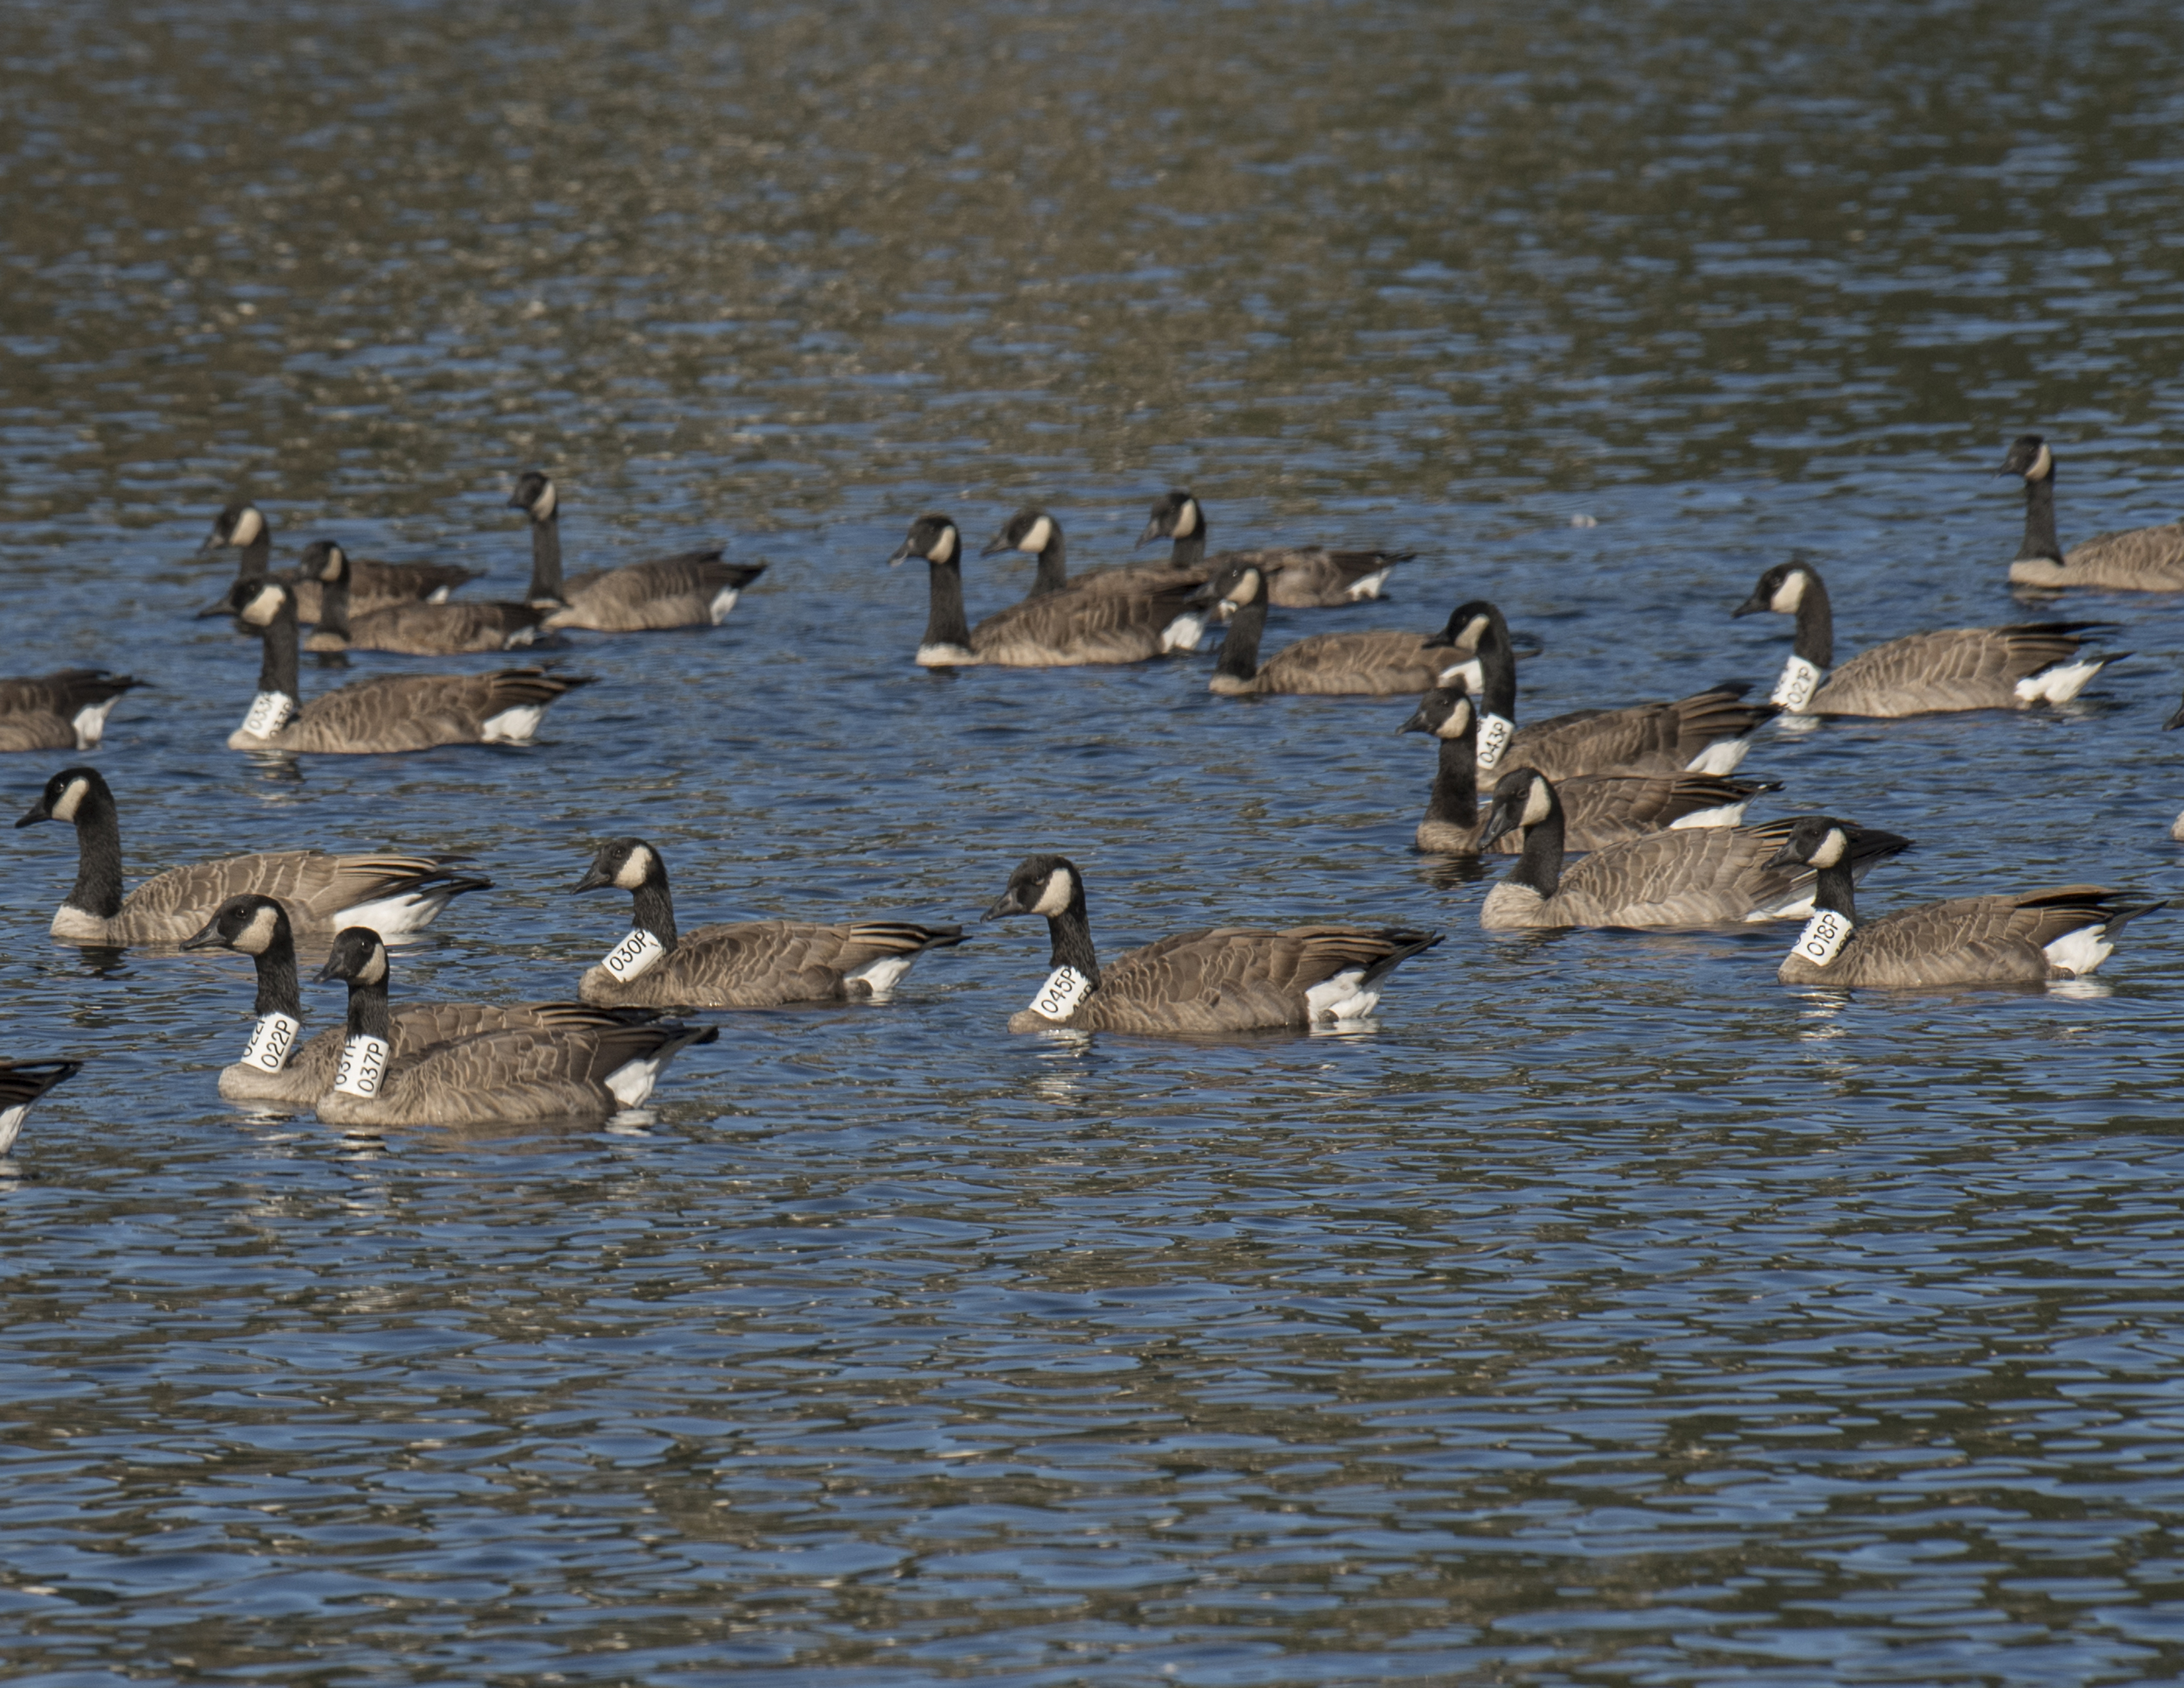 Since the moult period has ended, large congregations of geese have been observed in Long Lake, including many with collars - Ken Langelier photo